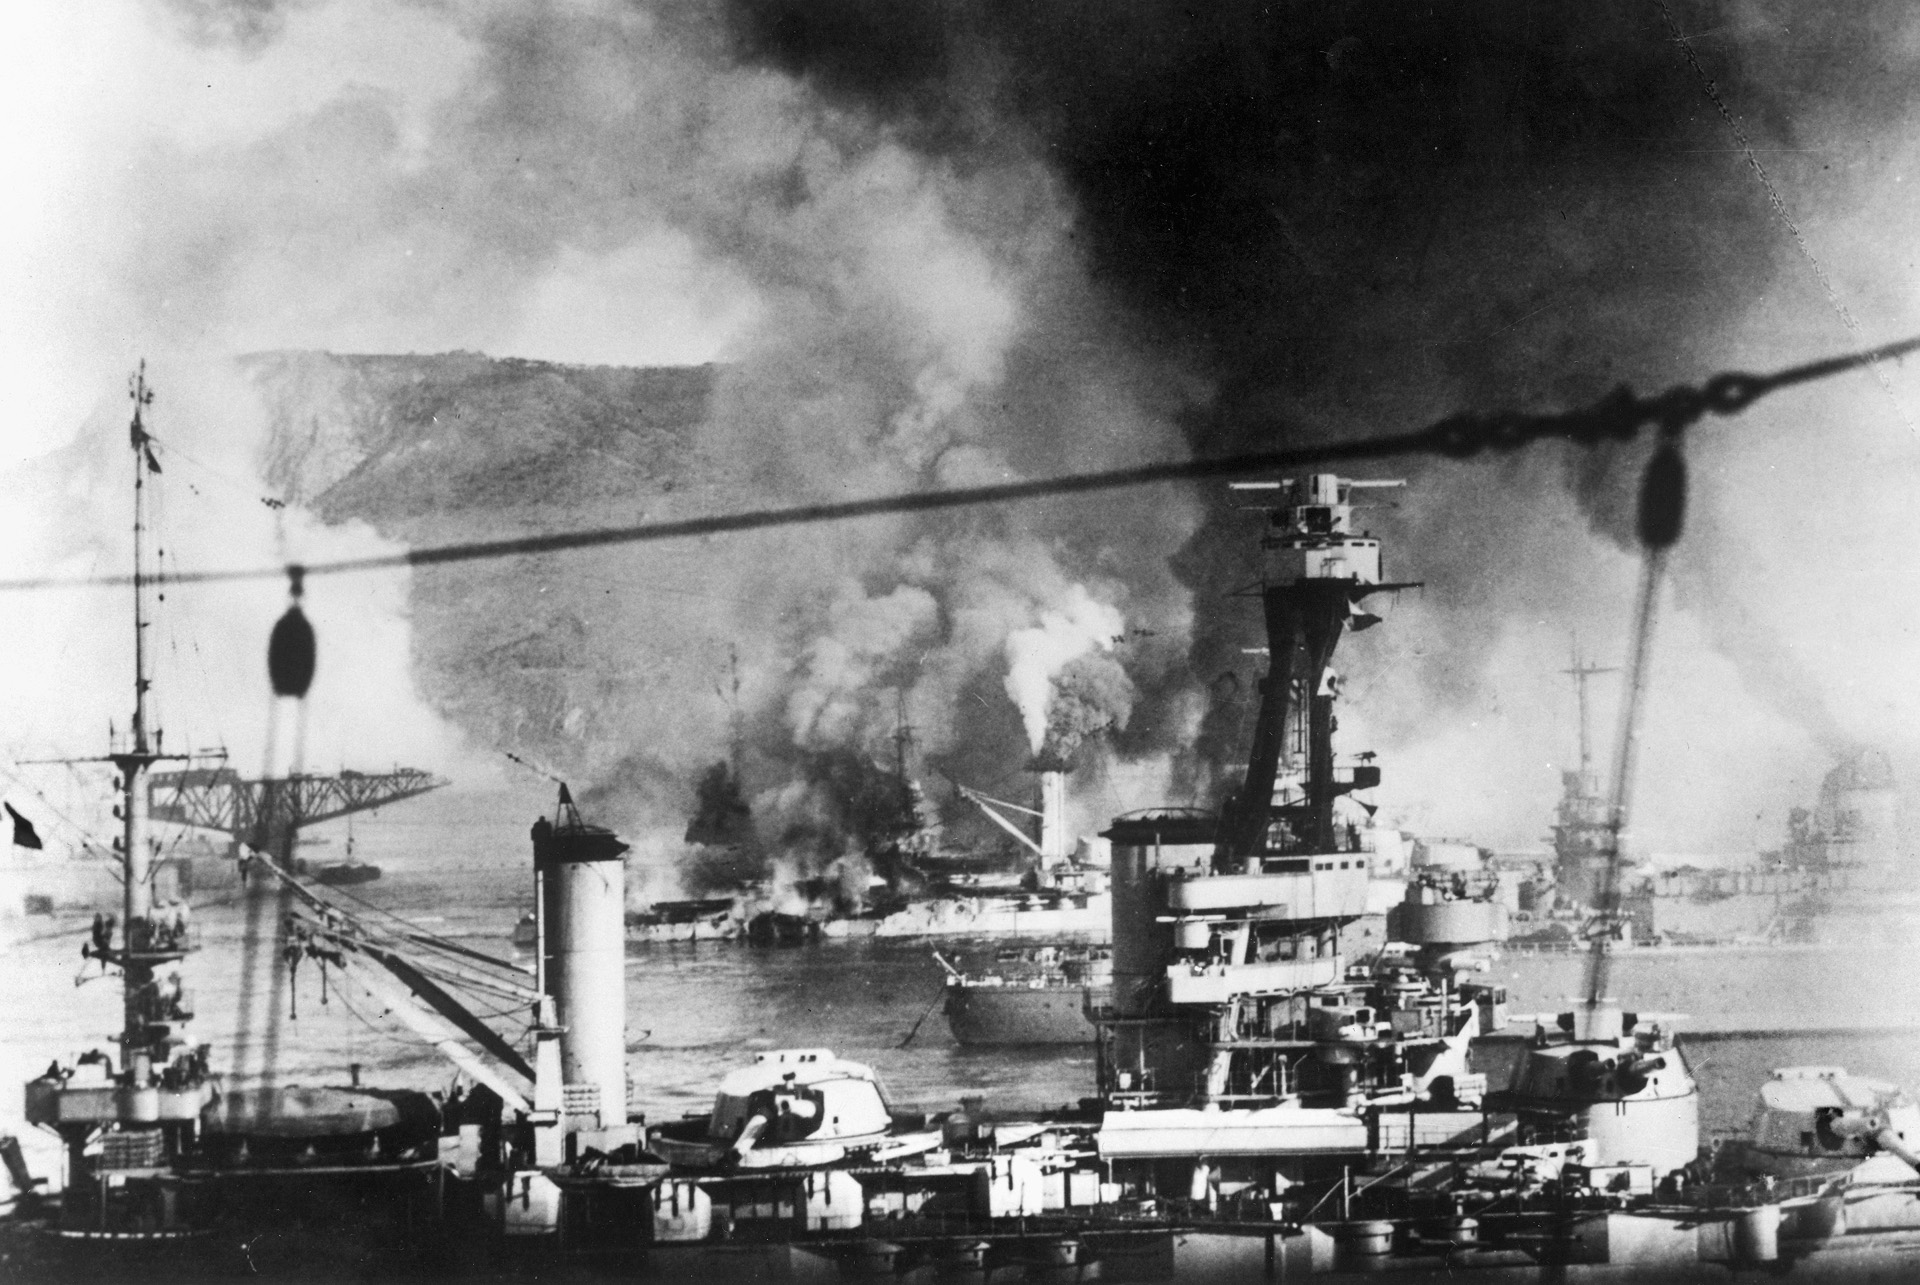  To keep it from falling into German hands, British Prime Minister Winston Churchill ordered the Royal Navy to bombard the formidable French fleet at Mers el-Kebir, near Oran, French Algeria. Here the fleet burns furiously on July 3, 1940. 